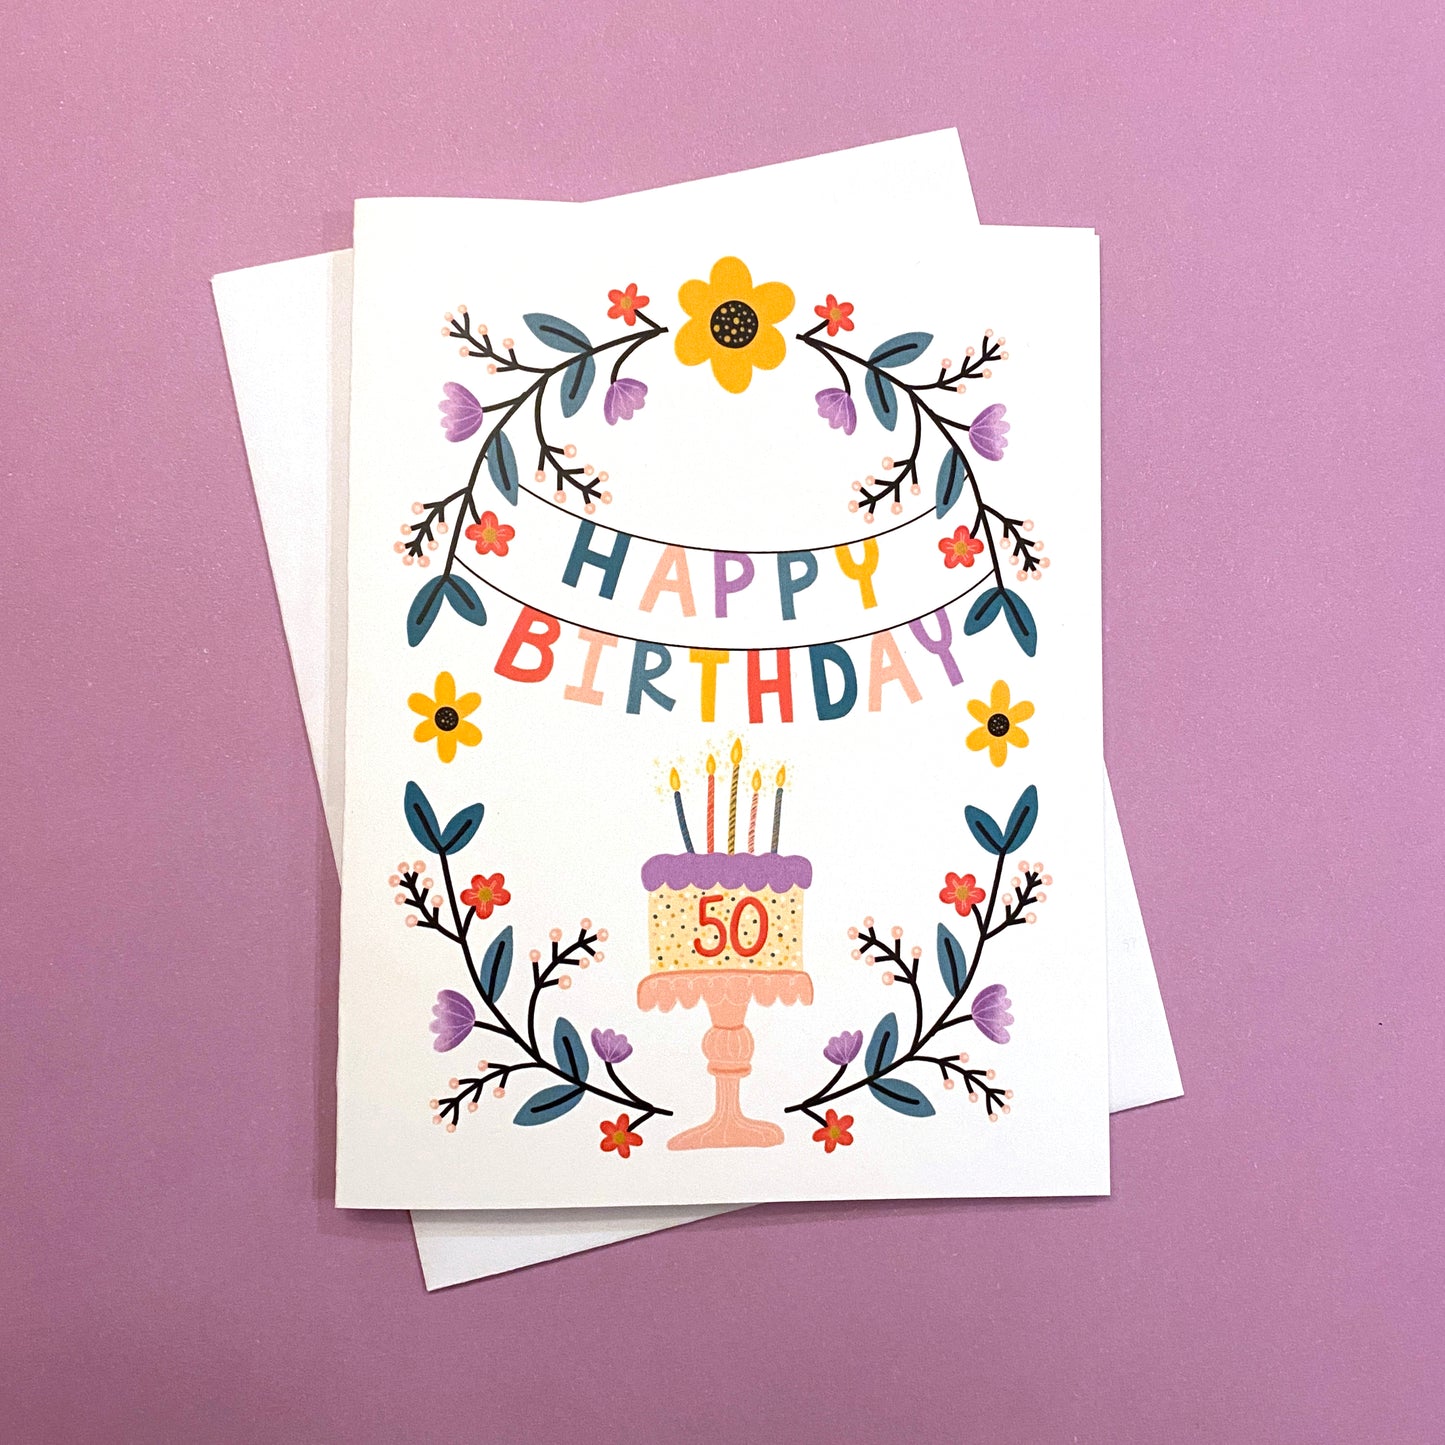 50th Birthday Card with beautiful floral design and birthday cake. Size A2 greeting card (4.25" x 5.5") with envelope, blank Inside. All cards are designed and Illustrated with love by me, Anna Fox, and are printed at my friendly neighborhood print shop in Denver, CO.